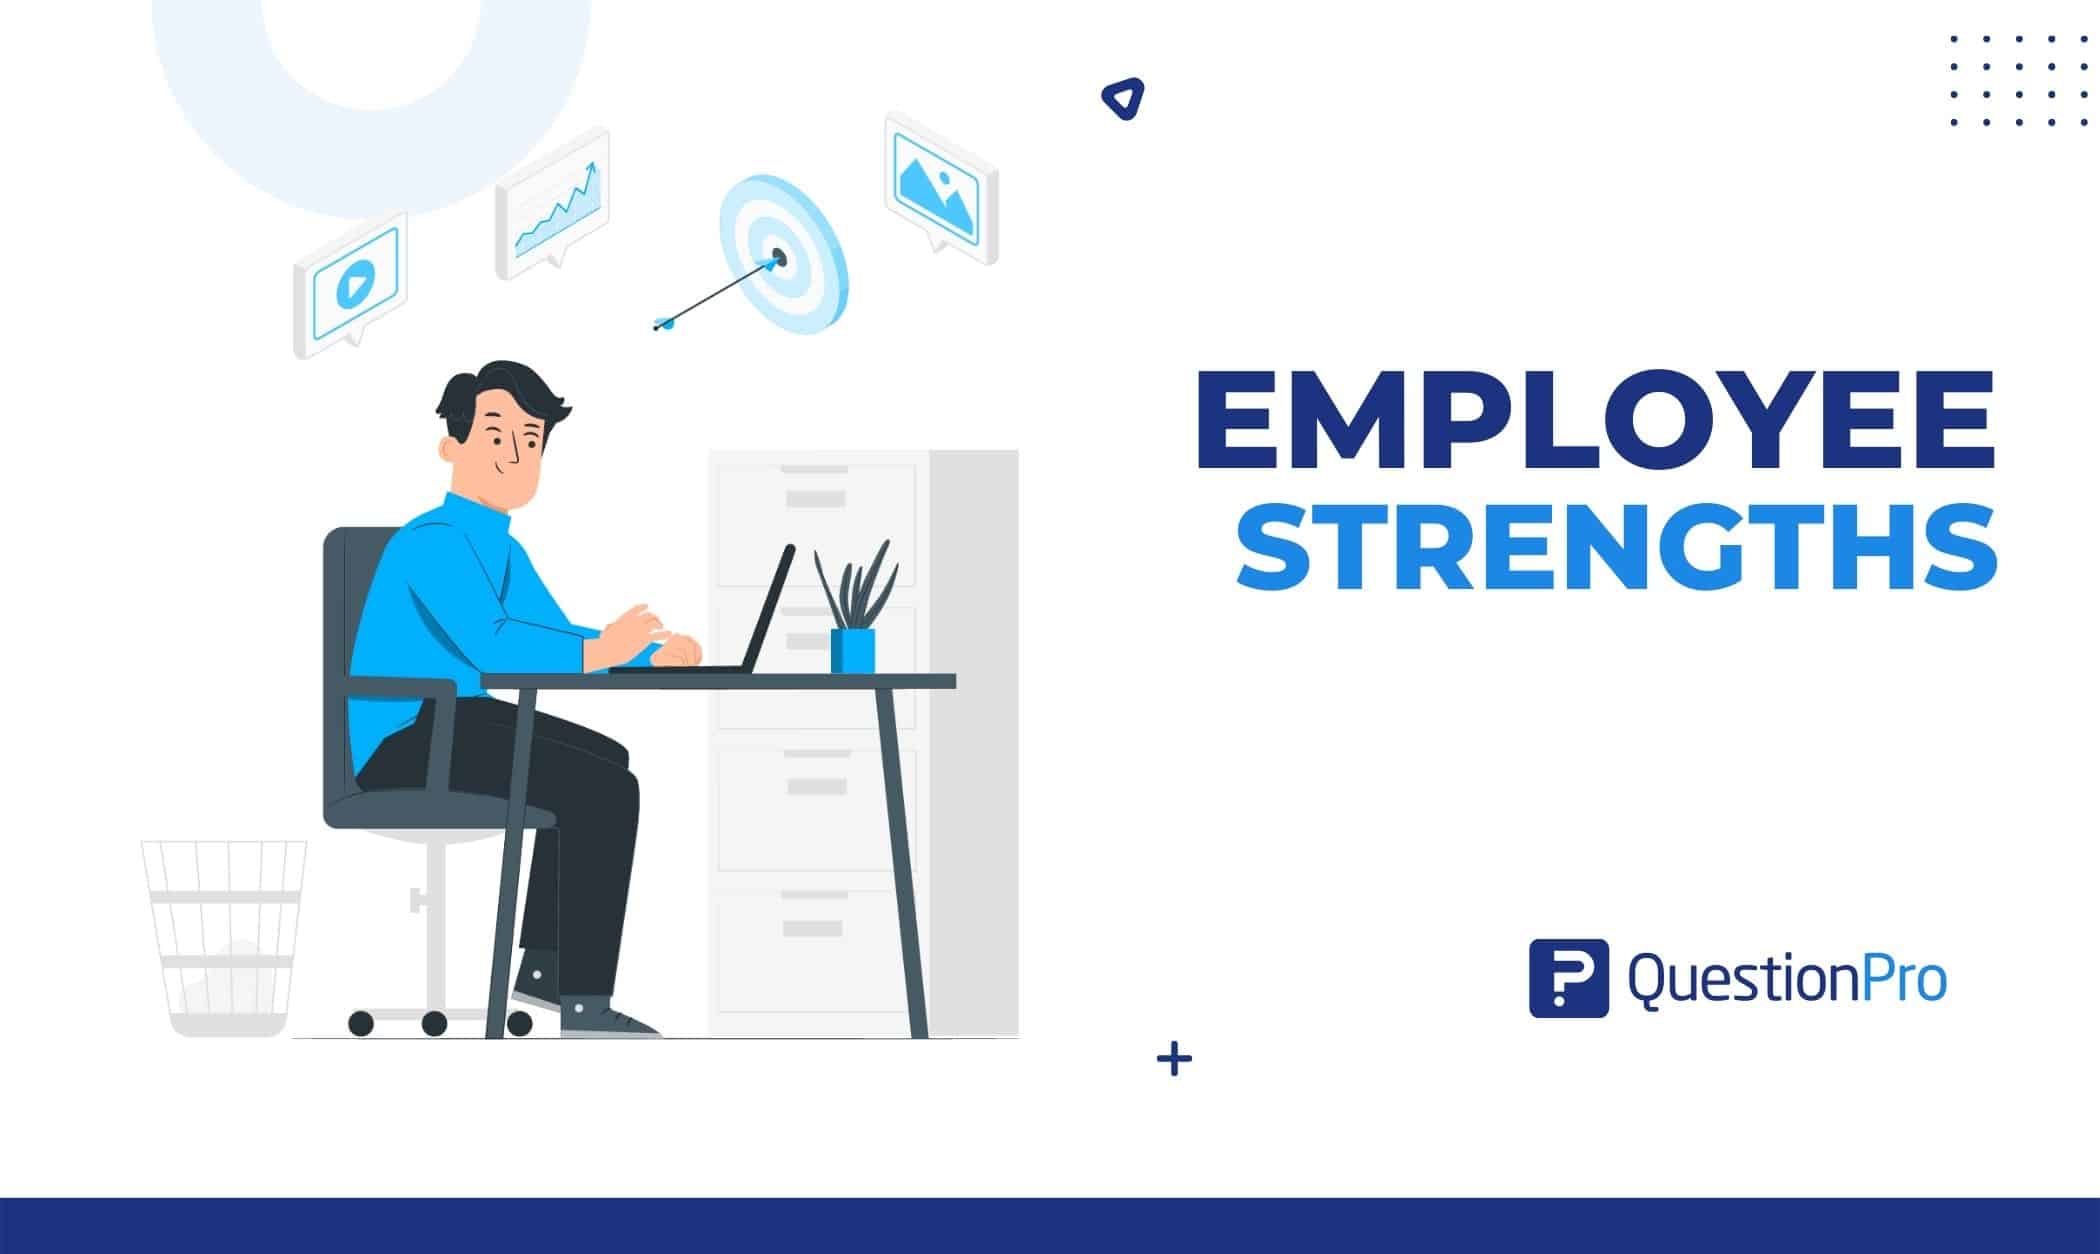 Promoting the employee strengths, makes them more engaged, work better, less likely to leave, and motivates them to make more money.